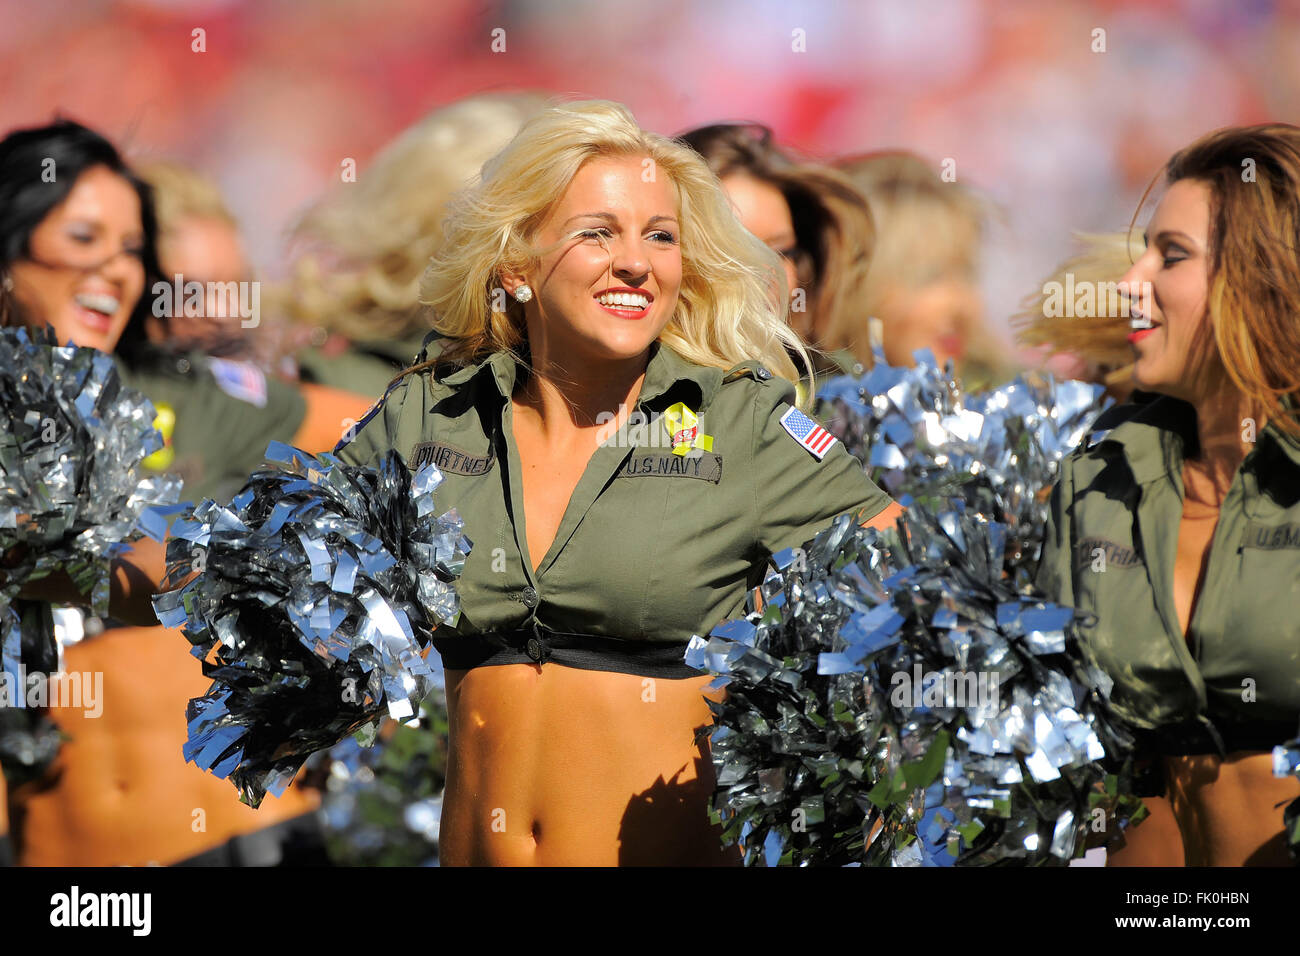 Tampa, Fla, USA. 13th Nov, 2011. Tampa Bay Buccaneers cheerleaders during the Bucs game against the Houston Texans at Raymond James Stadium on Nov. 13, 2011 in Tampa, Fla. ZUMA Press/Scott A. Miller © Scott A. Miller/ZUMA Wire/Alamy Live News Stock Photo